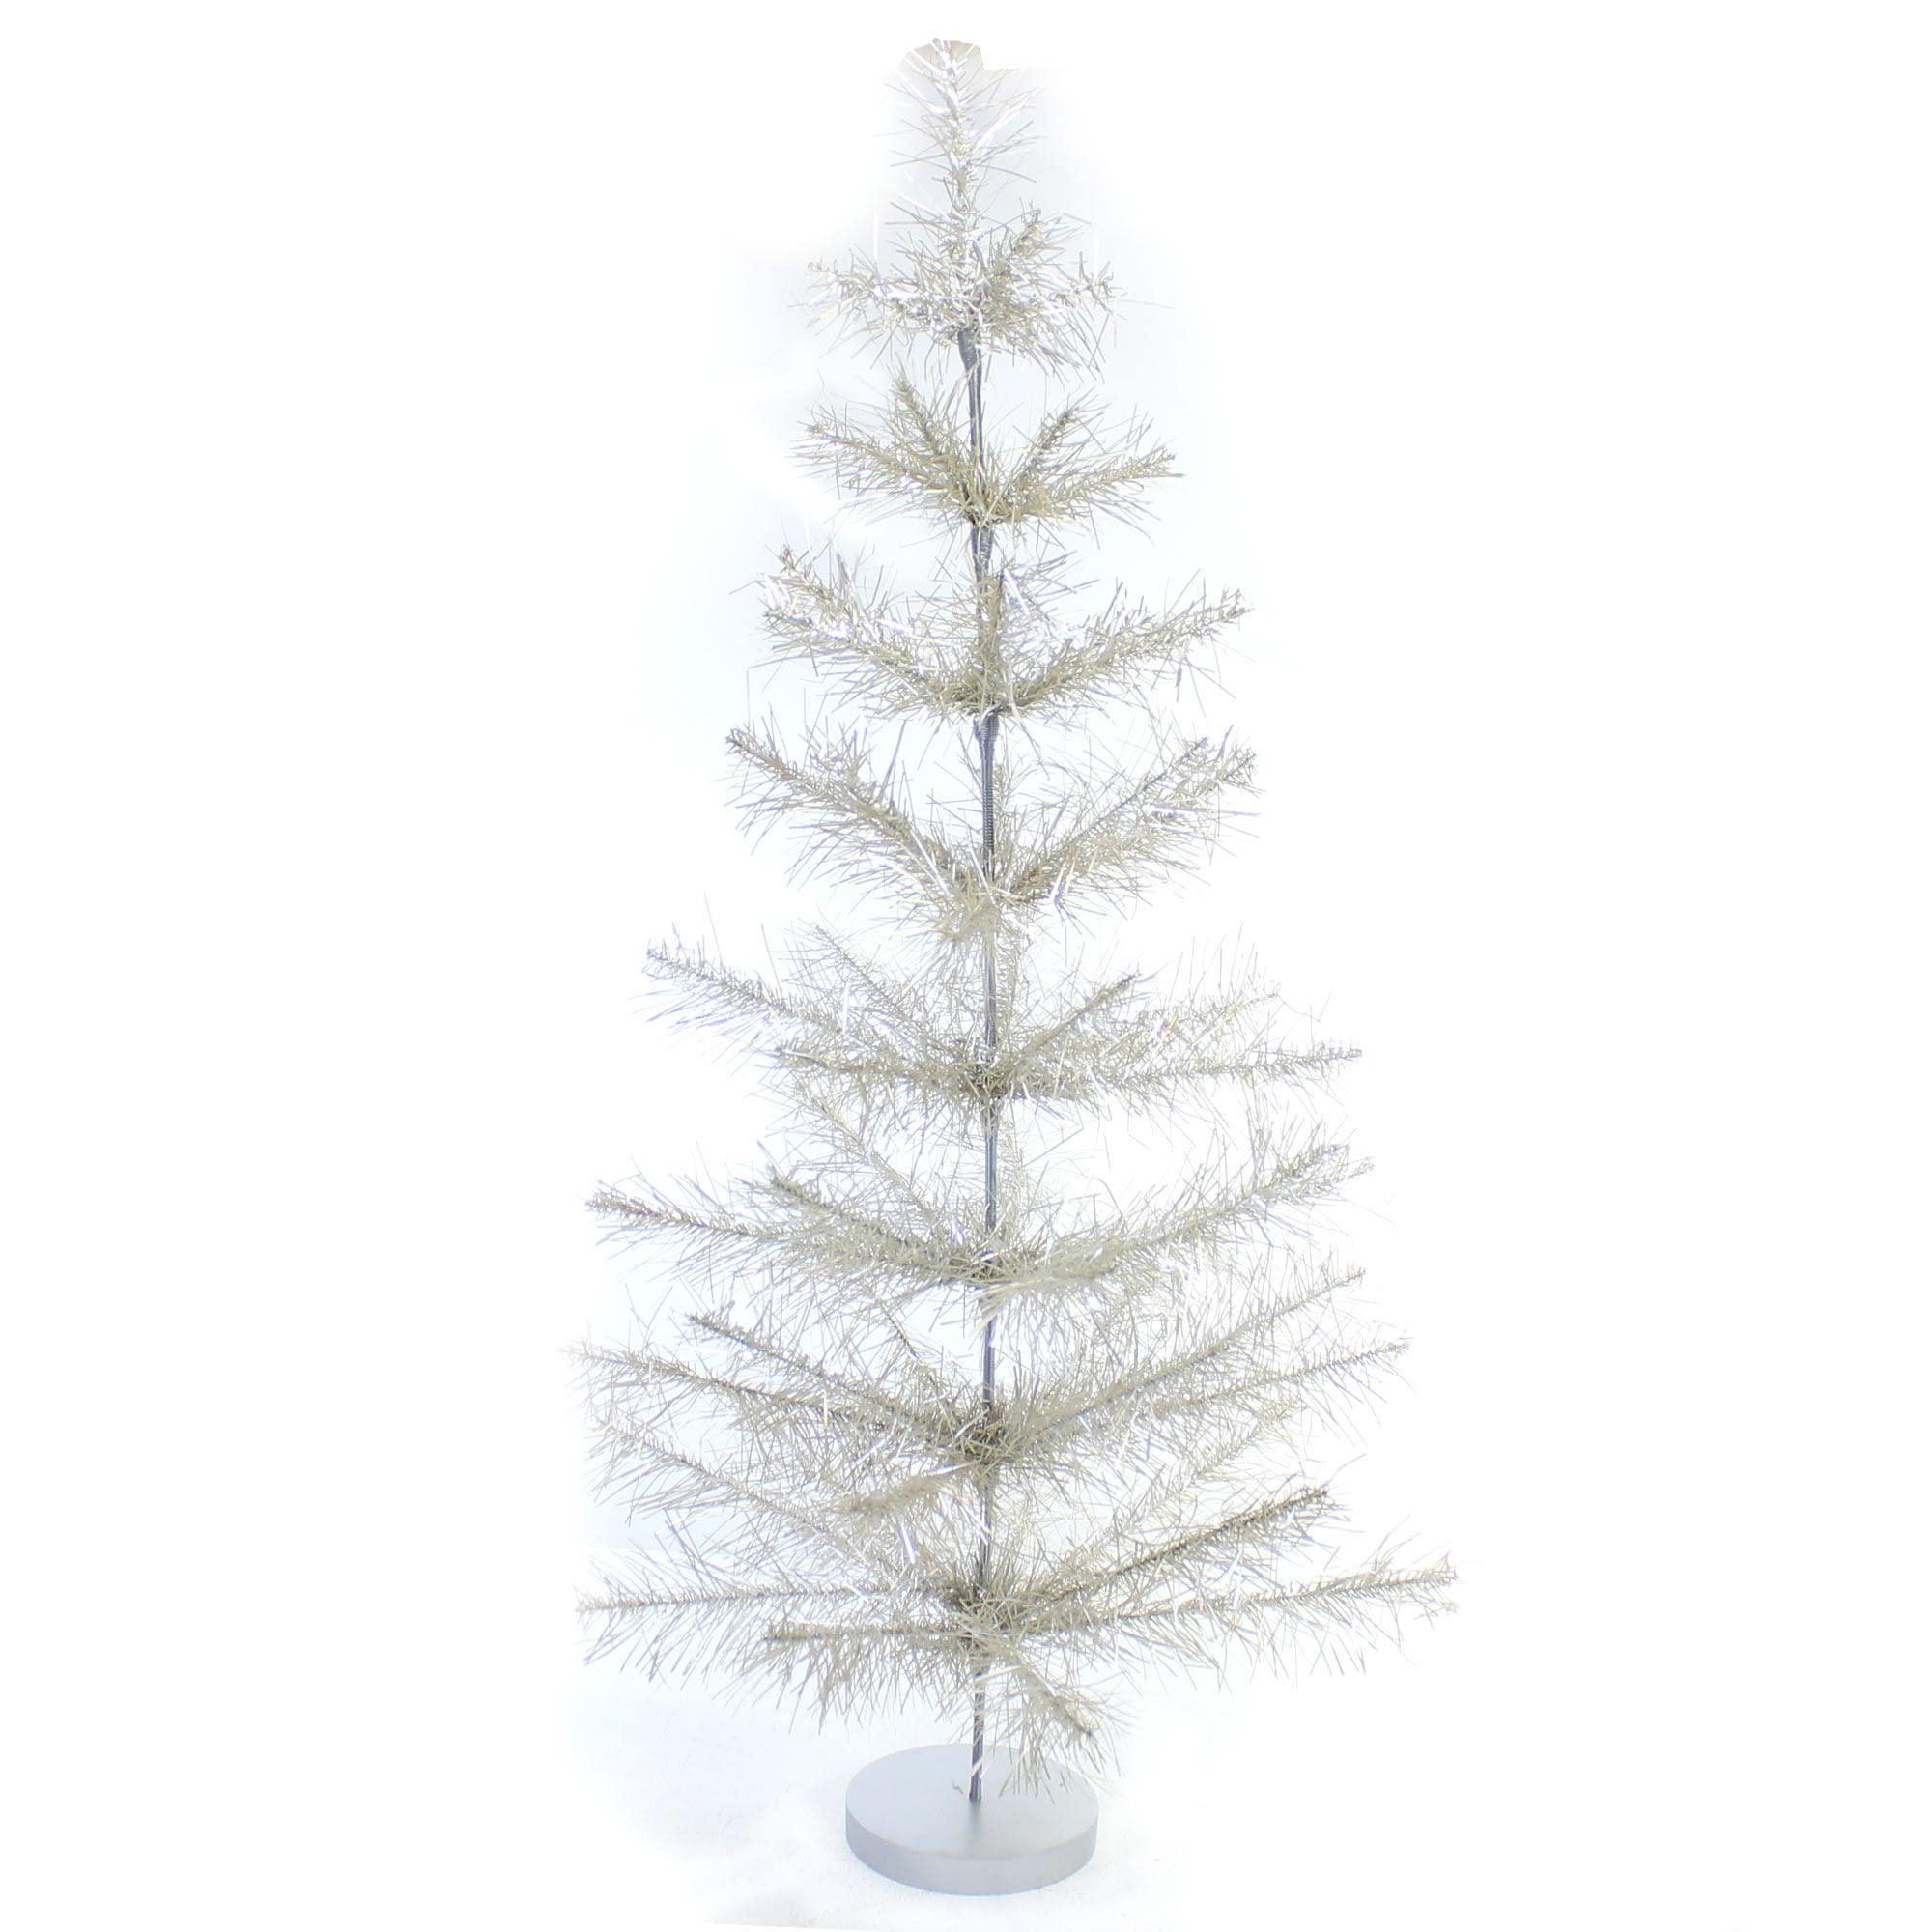 Christmas Ltd. christmas silver mylar tabletop tree mylar 3 ft elegant christmas classic - 1 tabletop christmas tree 37.0 inches - ms2133ls 